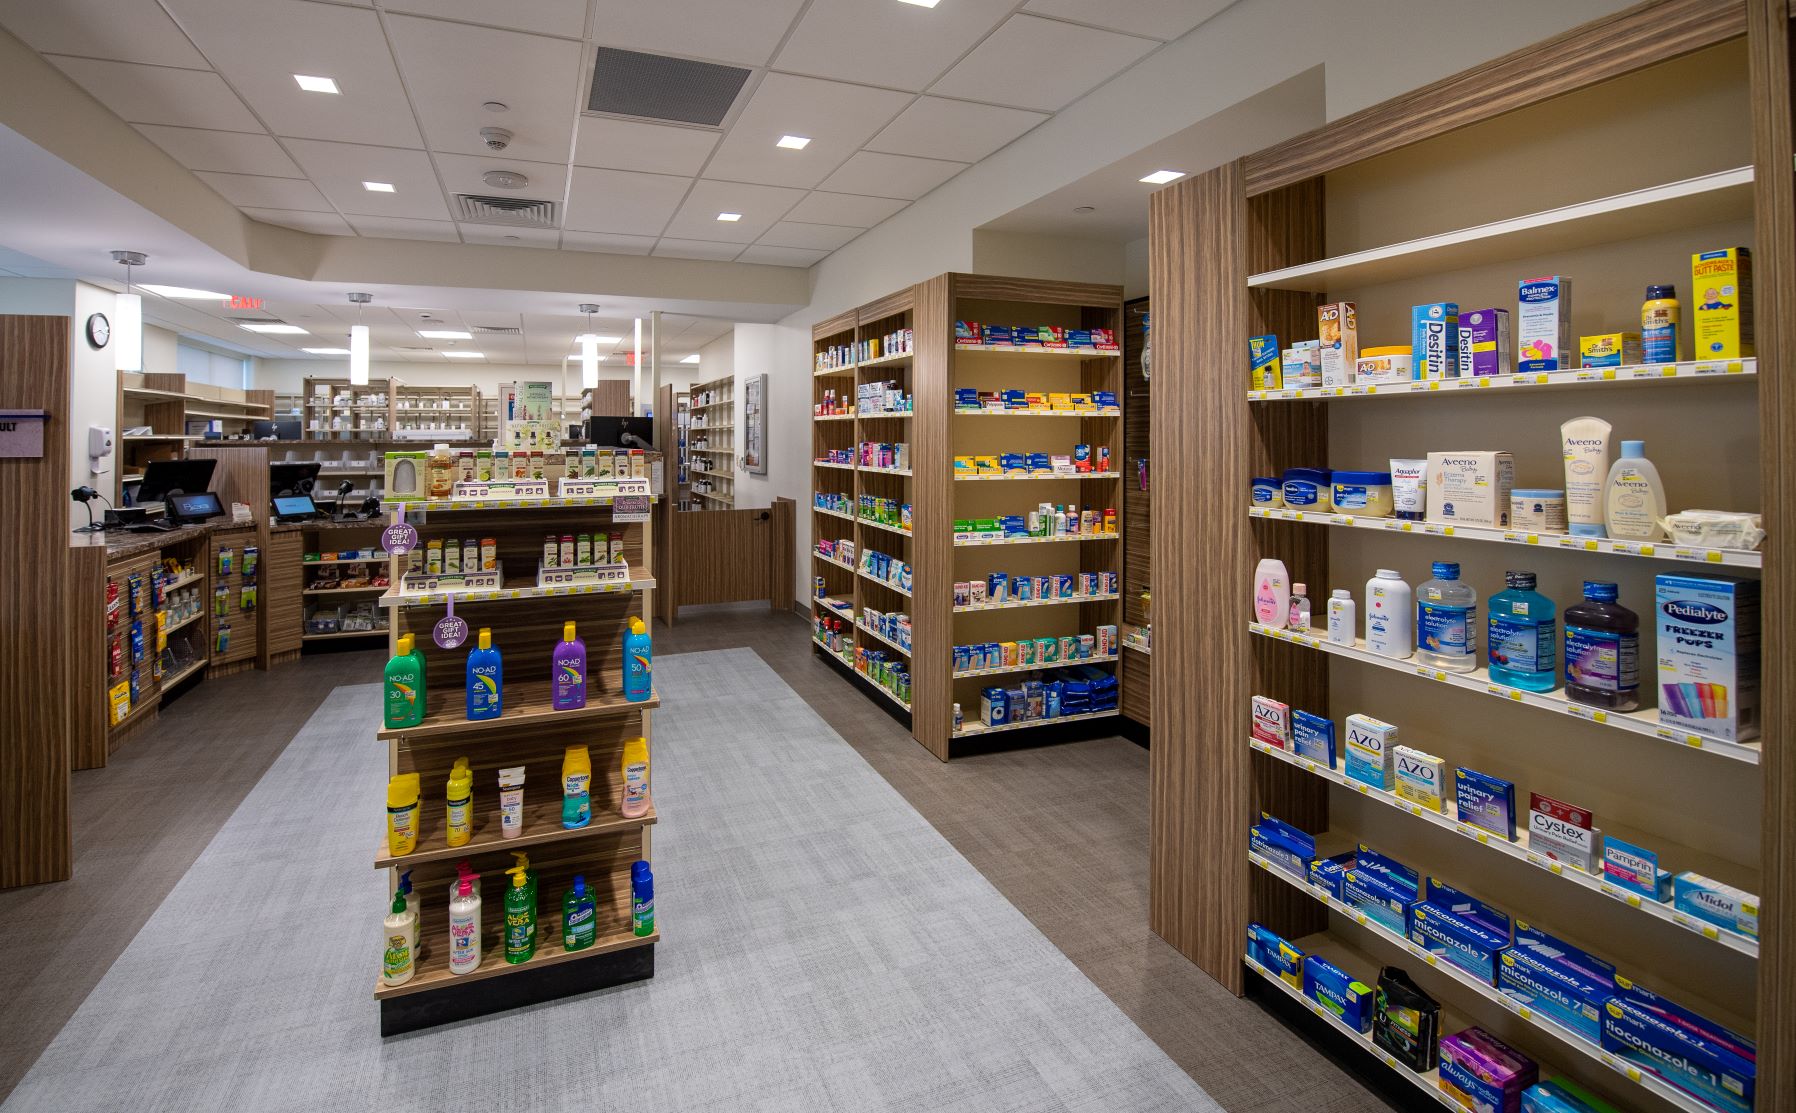 Inspira Retail Pharmacy interior shelving with products